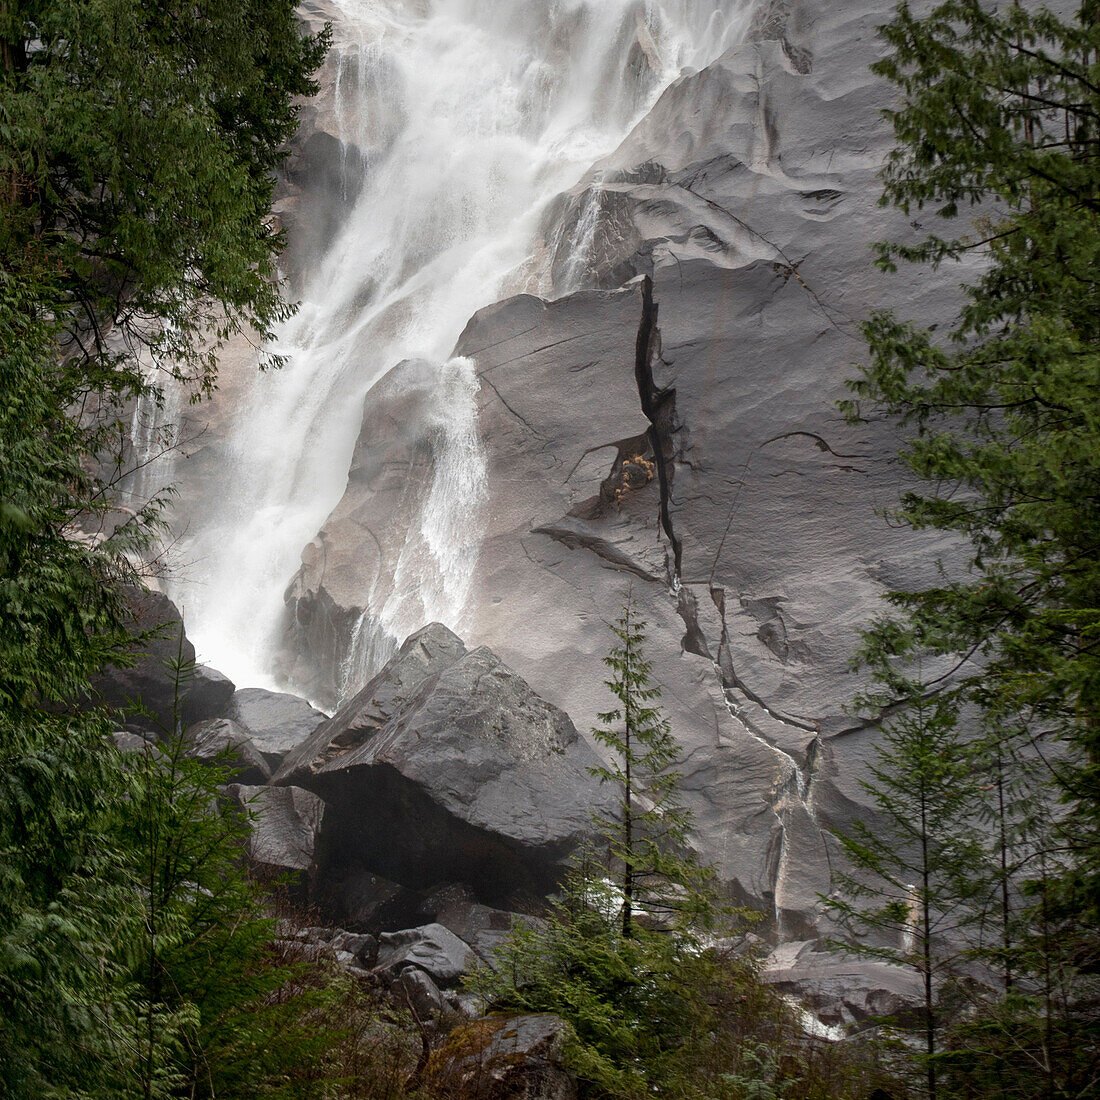 'Water Cascading Down The Rock And Forming A Mist In Jasper National Park; Alberta, Canada'